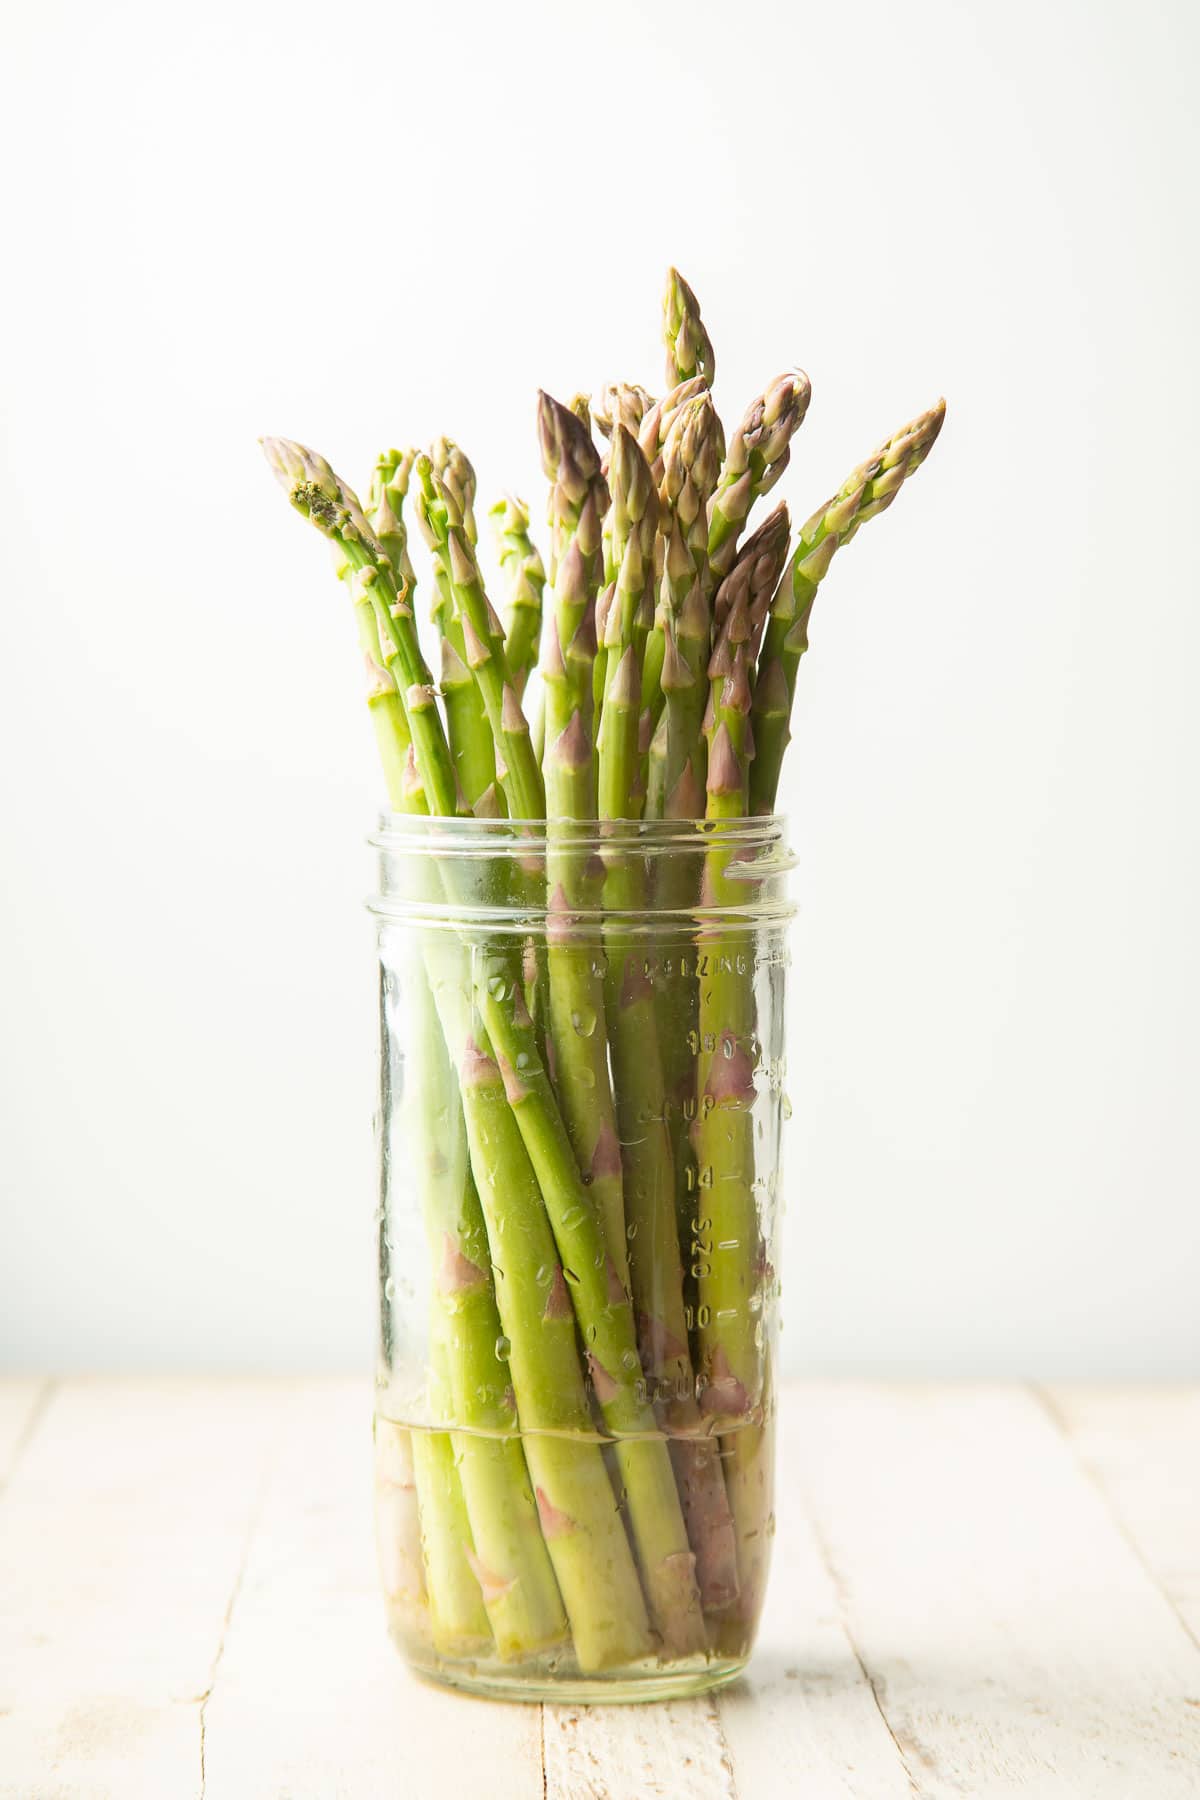 Asparagus spears standing in a jar containing a small amount of water.